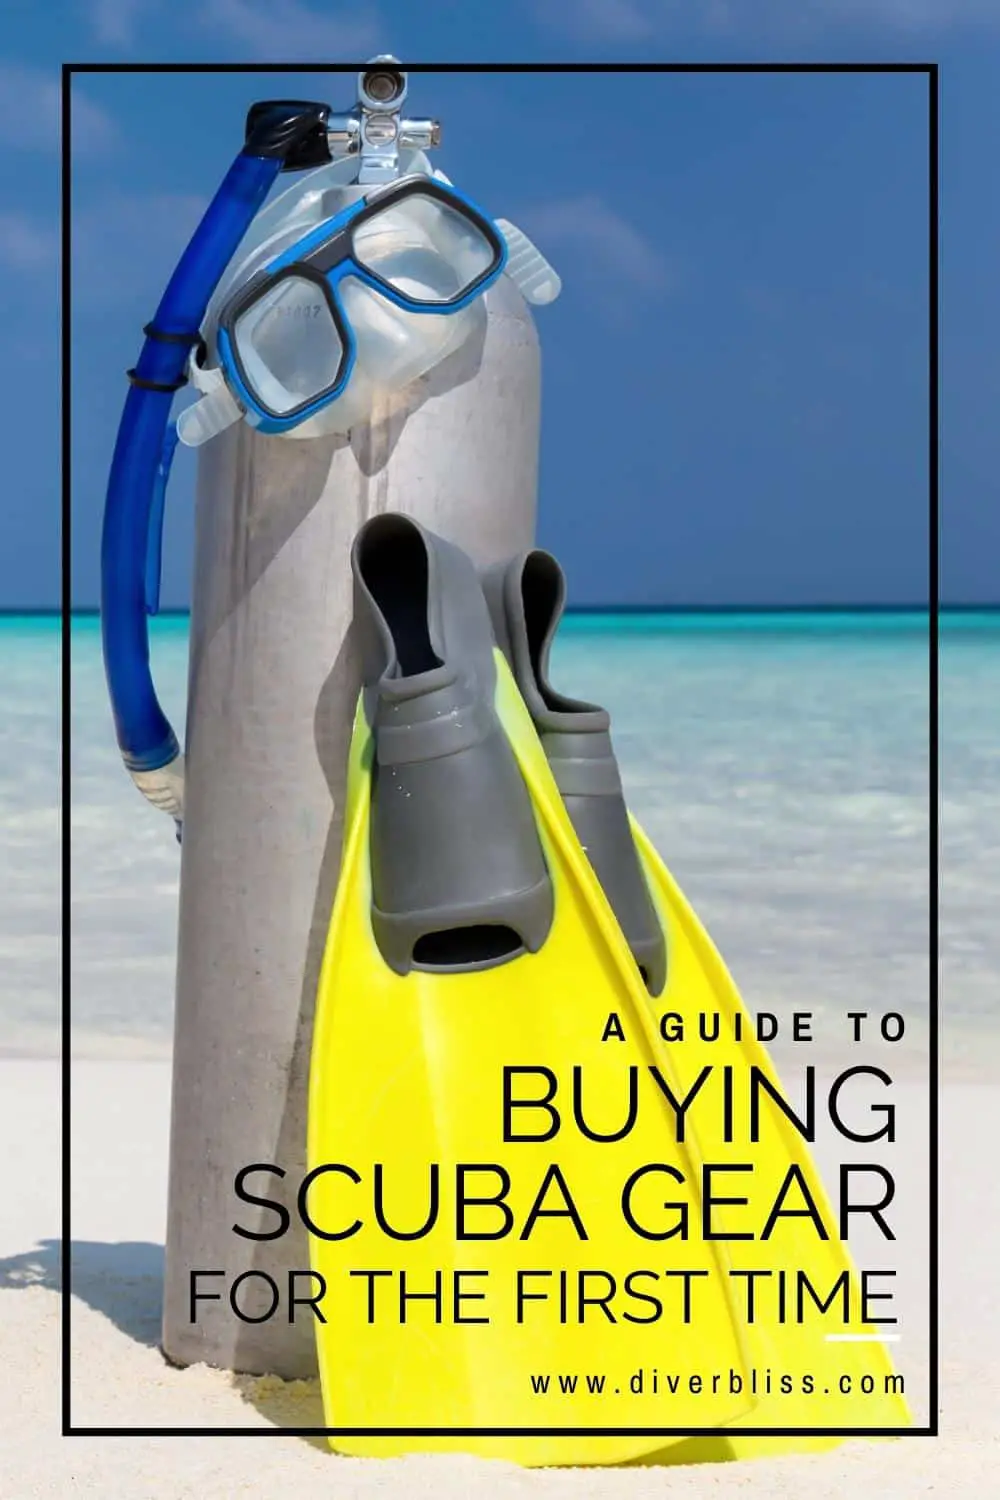 A guide to buying scuba gear for the first time